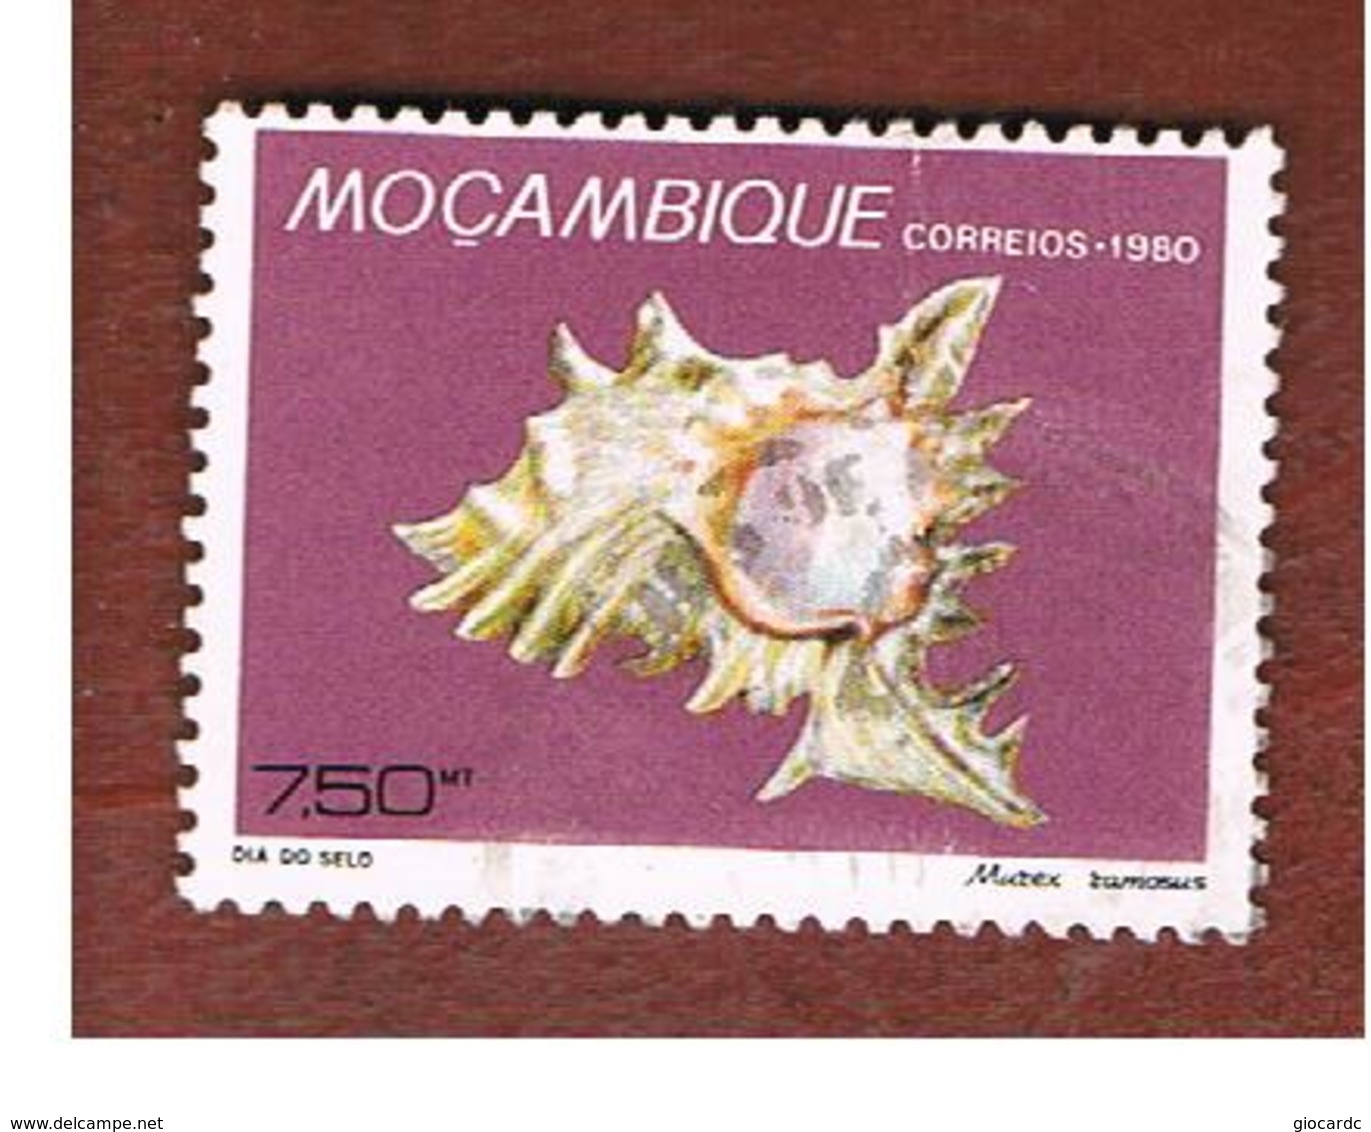 MOZAMBICO (MOZAMBIQUE)   - SG   844  -  1980 STAMP DAY: SHELLS (MUREX RAMOSUS) -  USED - Mozambico